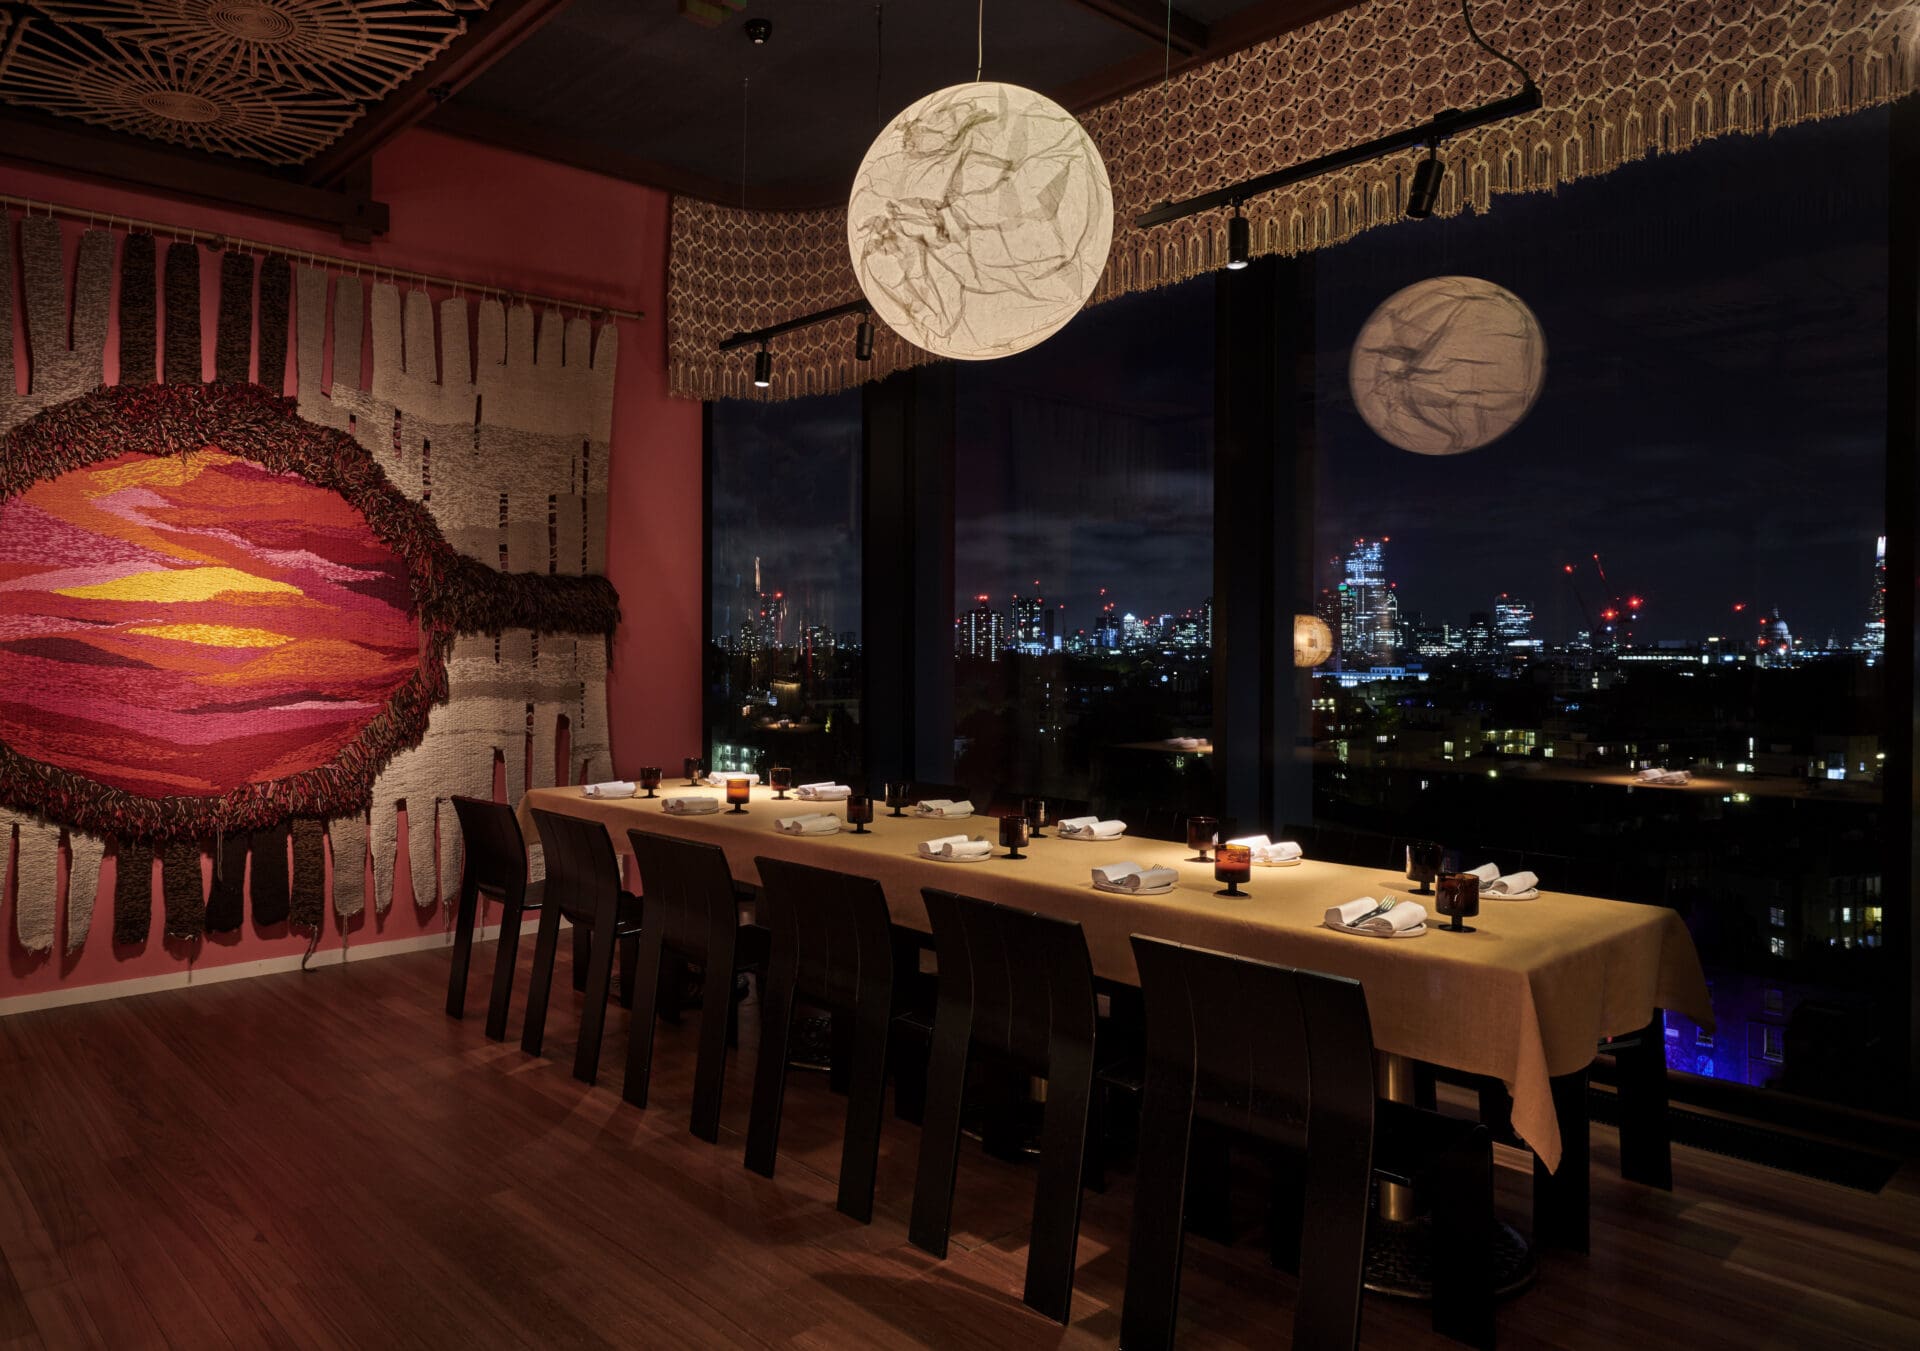 The best private dining rooms in London | Sparkly skyline views seen from the private dining room at Decimo, The Standard